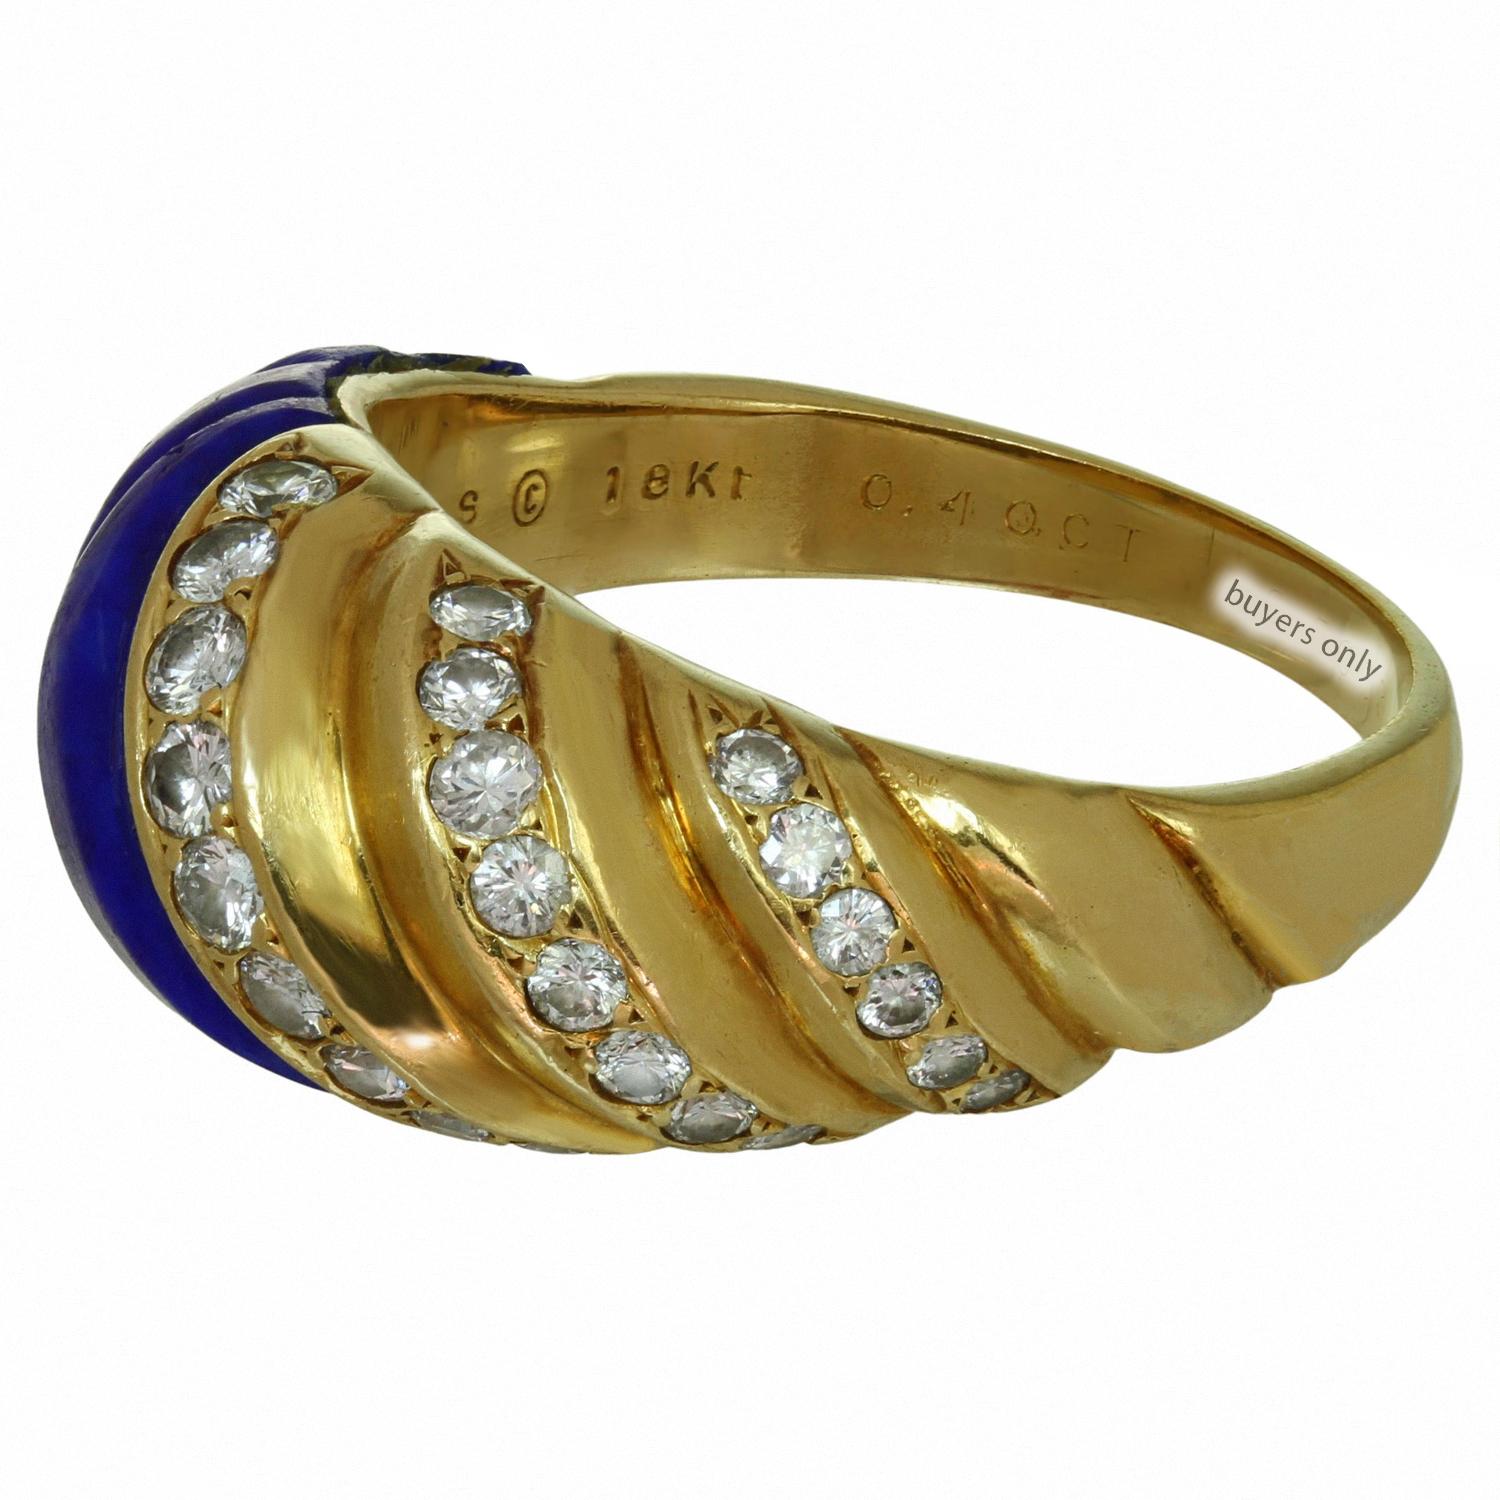 VAN CLEEF & ARPELS Diamond Lapis Lazuli Yellow Gold Ring. Sz. 54 In Good Condition For Sale In New York, NY